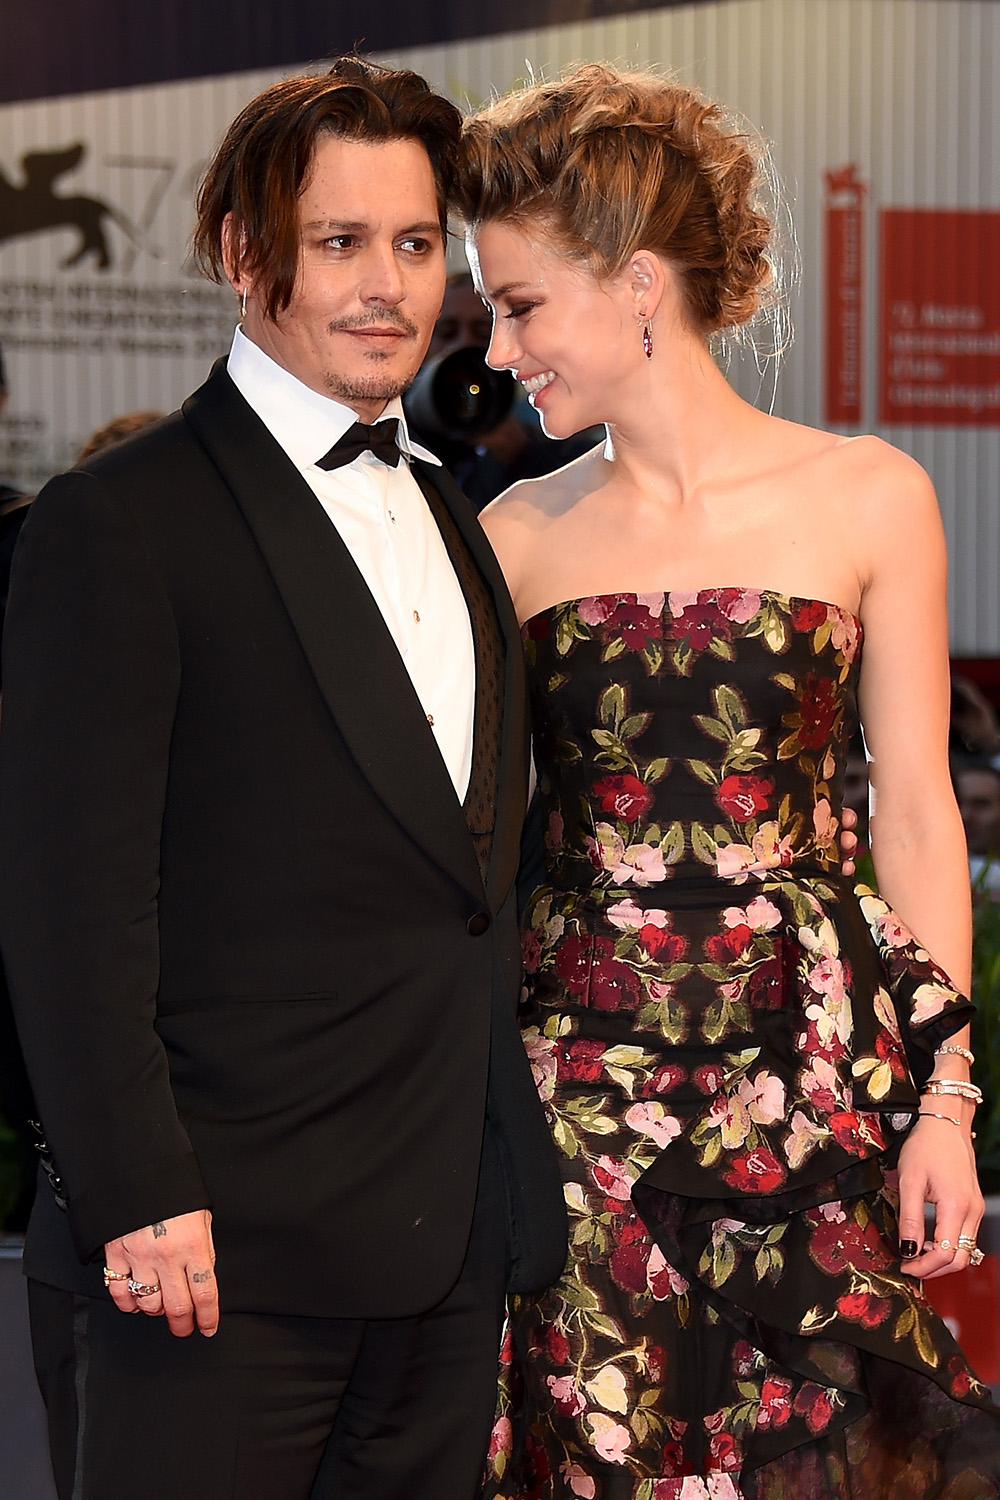 Johnny Depp and Amber Heard have the look of love at The Danish Girl premiere during the 72nd Venice Film Festival in September, 2015.